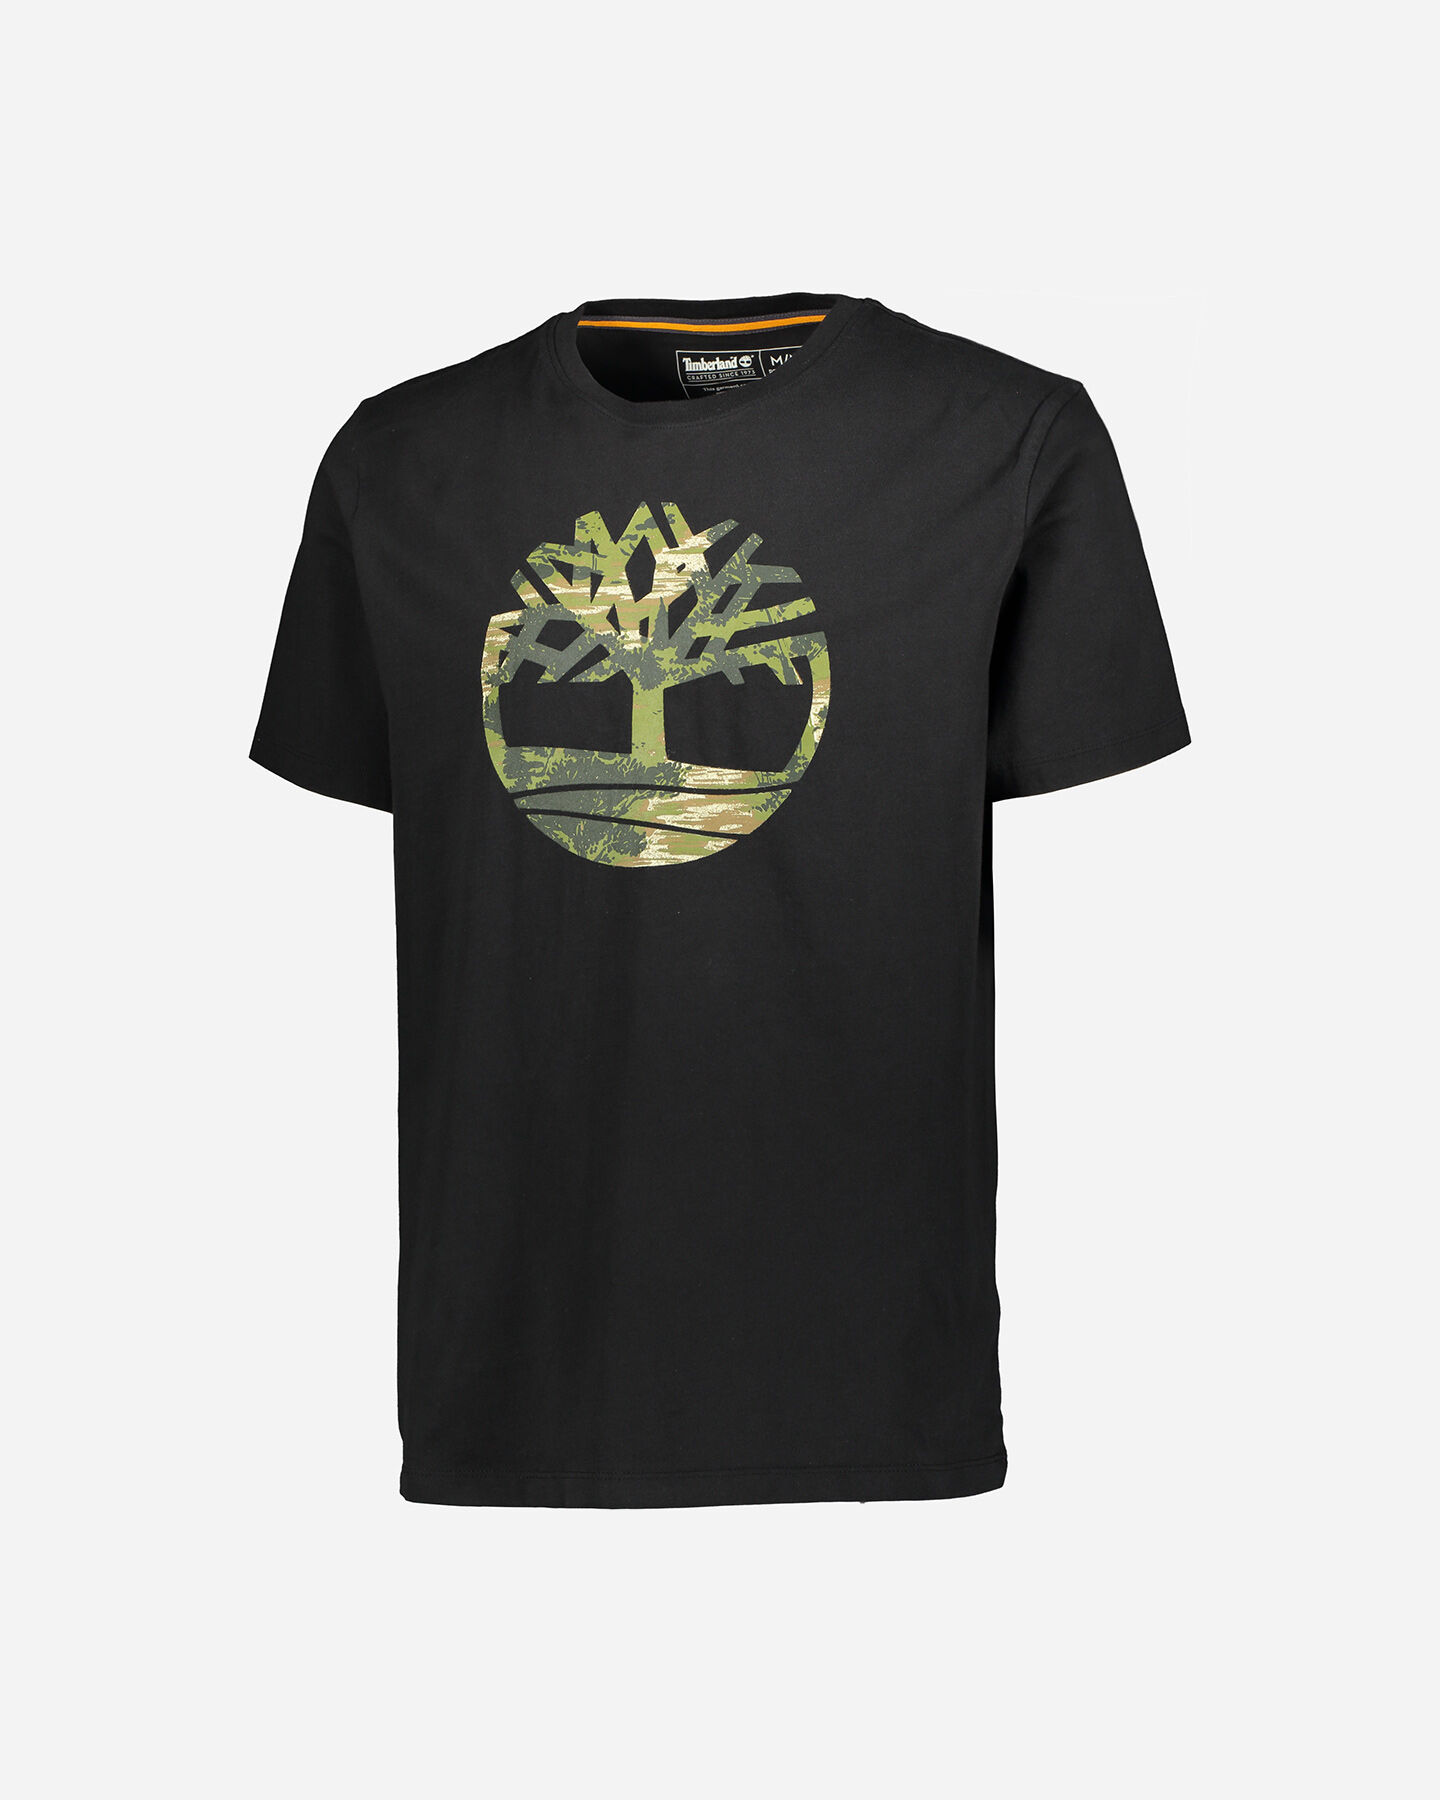  T-Shirt TIMBERLAND CAMO TREE M S4088648|0011|S scatto 0